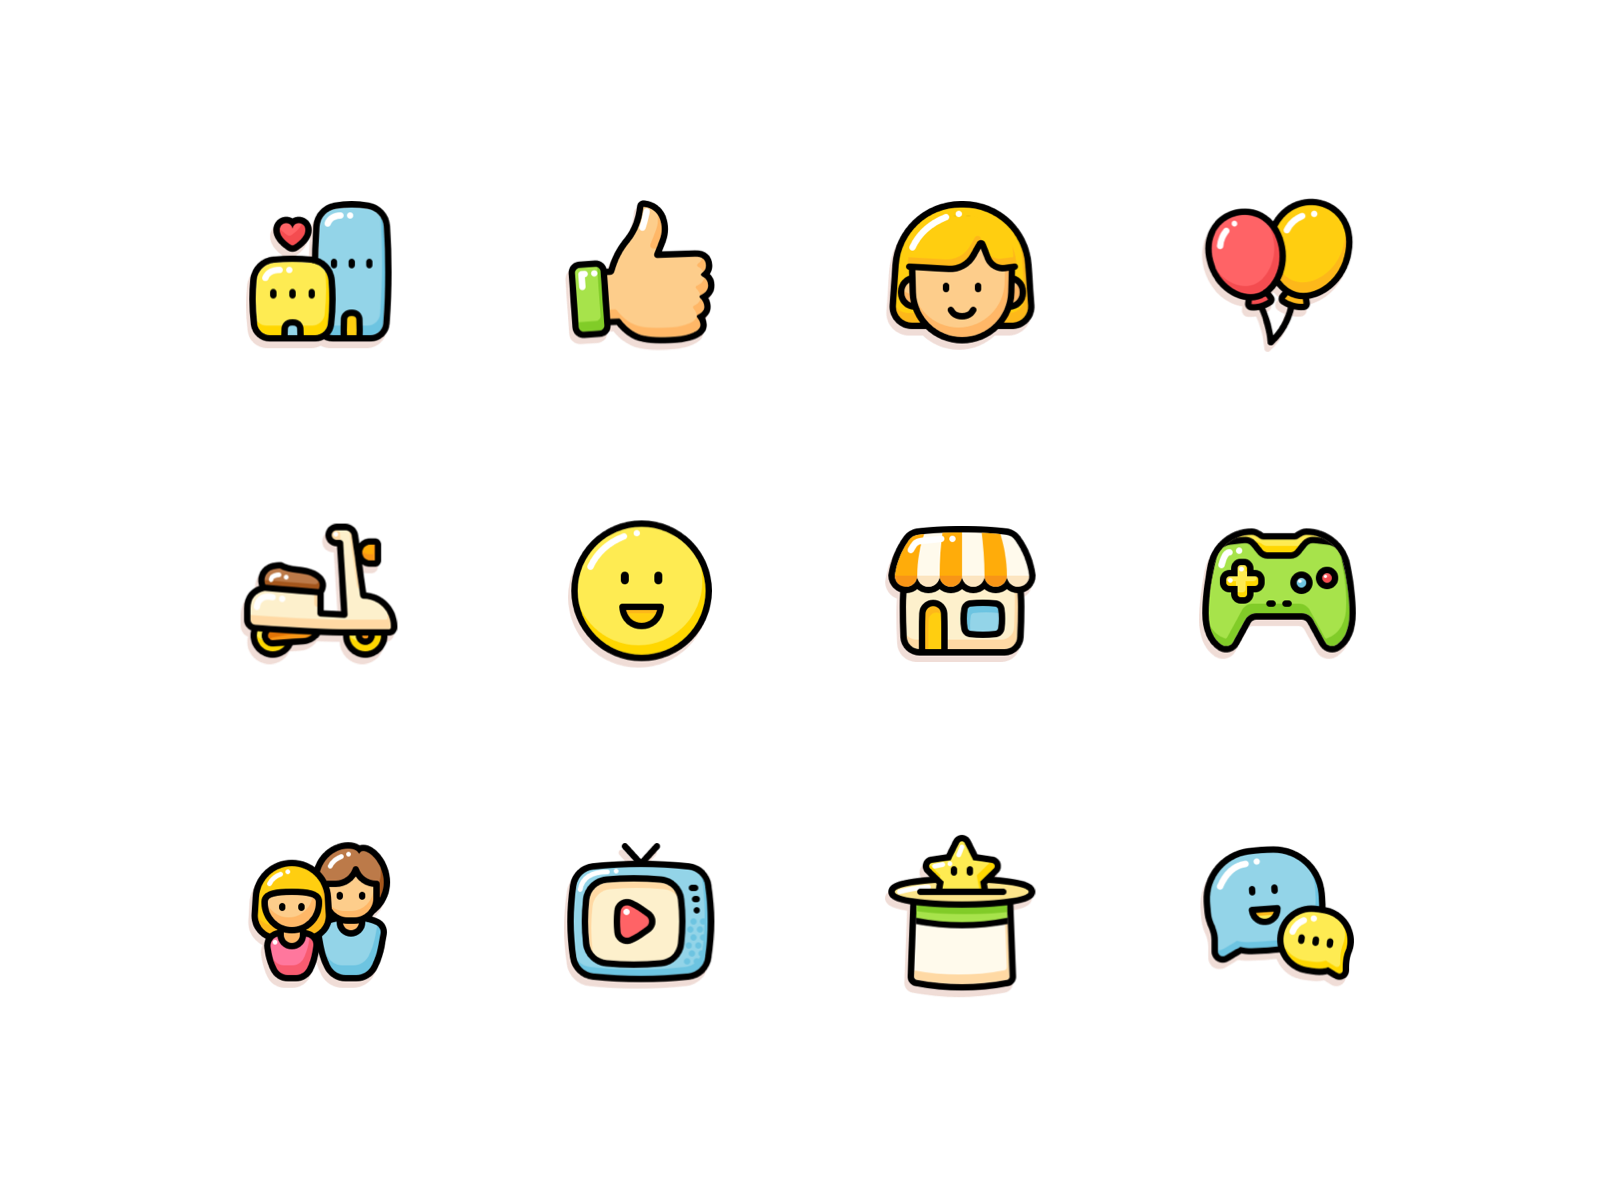 Cute icons by jimmydeath on Dribbble